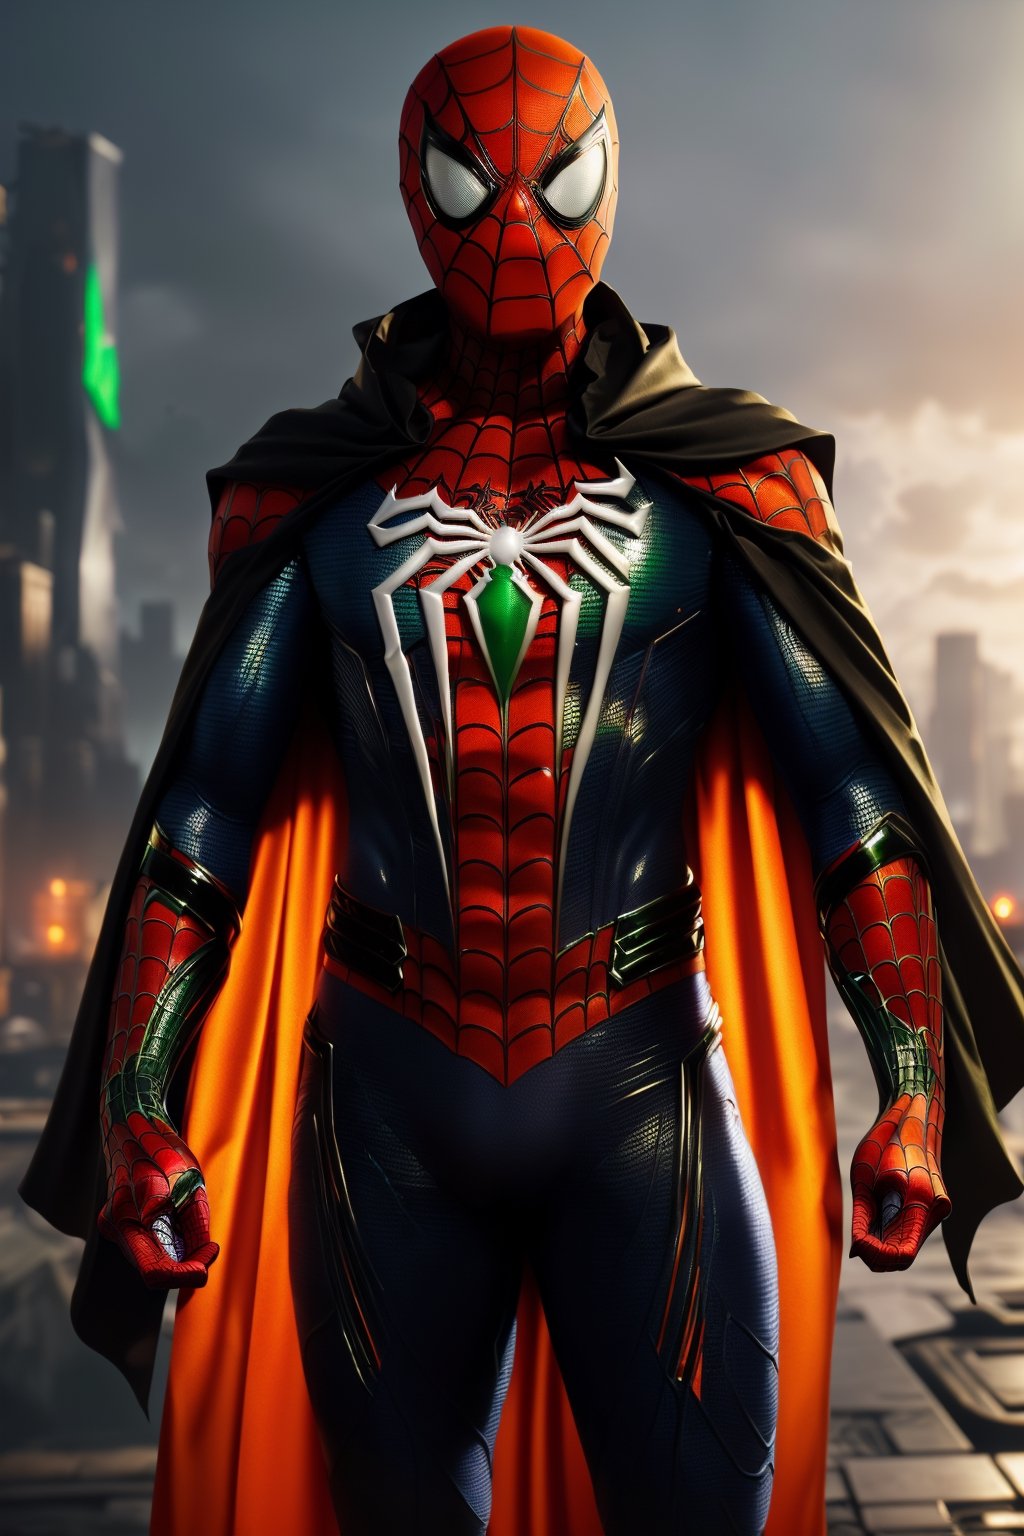 (Breathtaking 8K concept art), (Spiderman in a sleek orange and green armored suit, unmasked, with a flowing black cape:1.3), Against a detailed night cityscape, bathed in natural volumetric lighting, reminiscent of artistic visionaries like Greg Rutkowski, (A masterpiece trending on ArtStation:1.3)